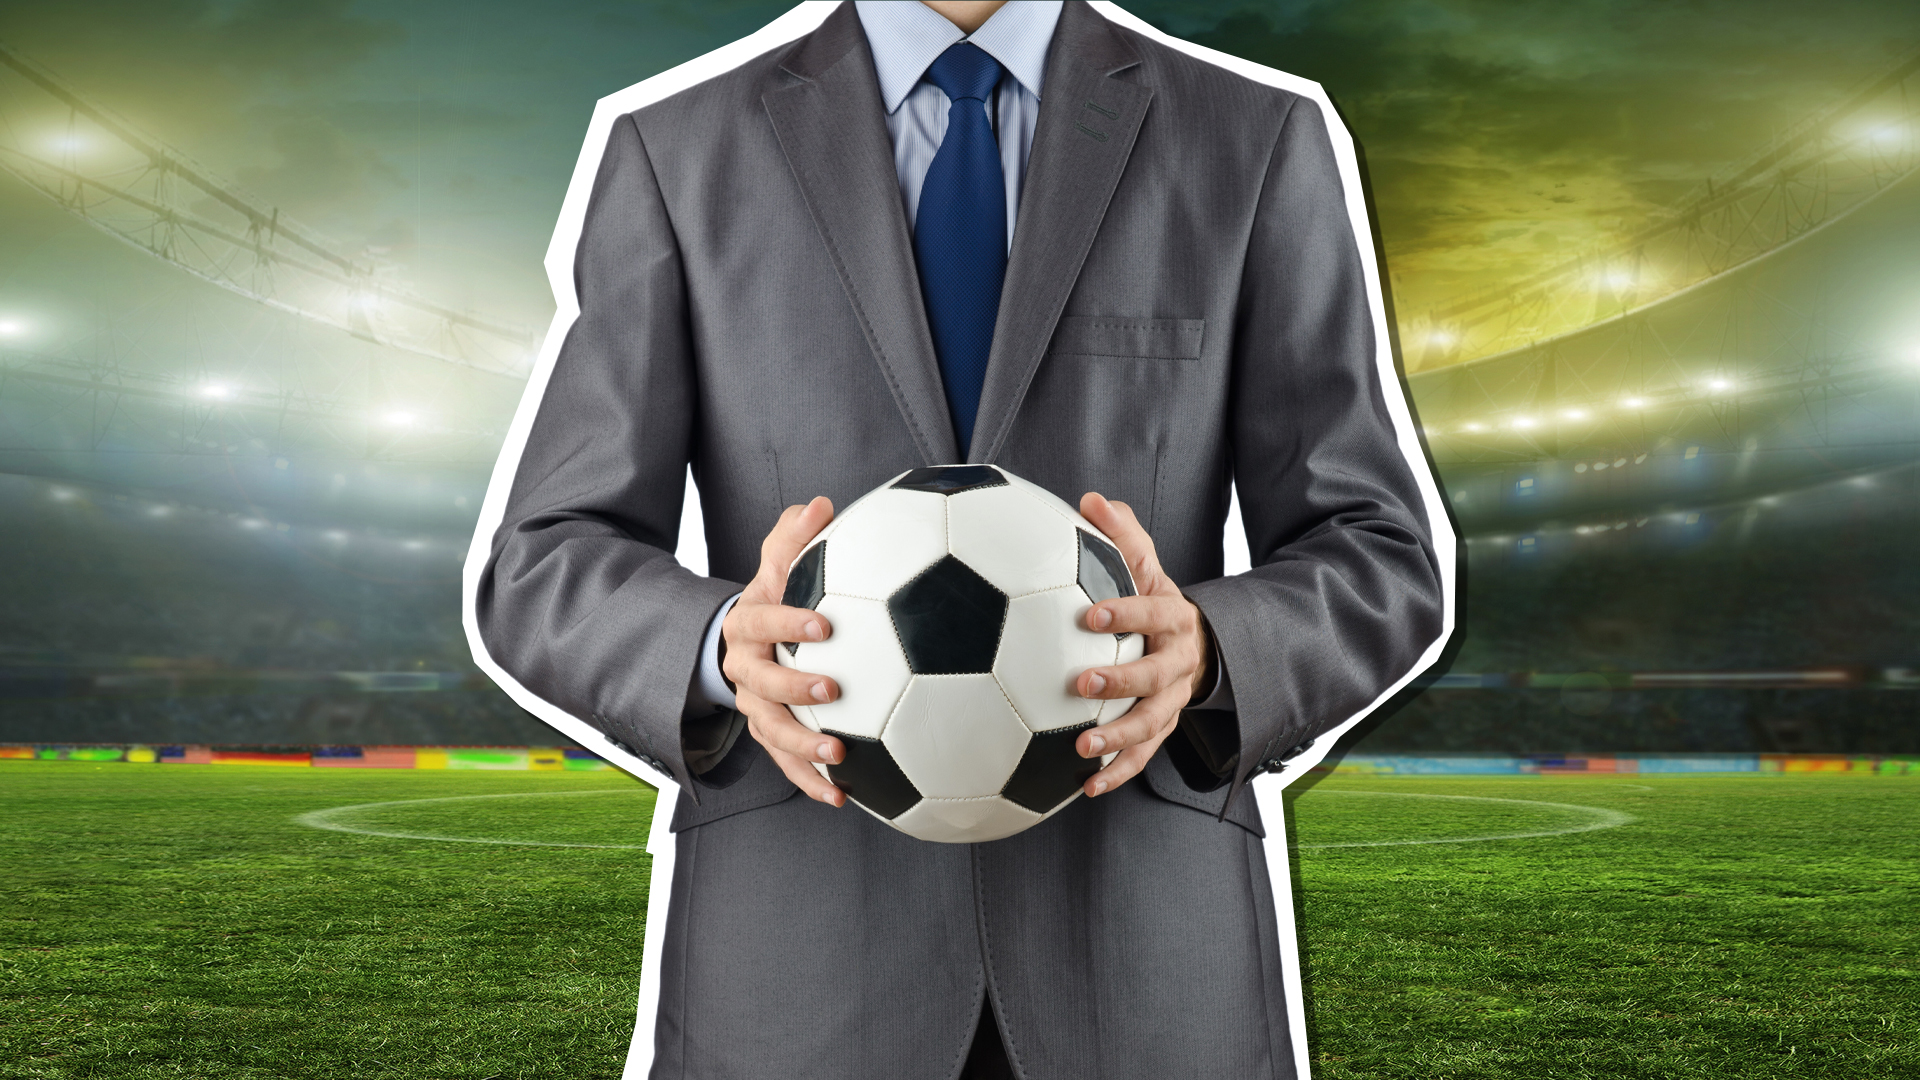 A football manager in a suit and holding a ball